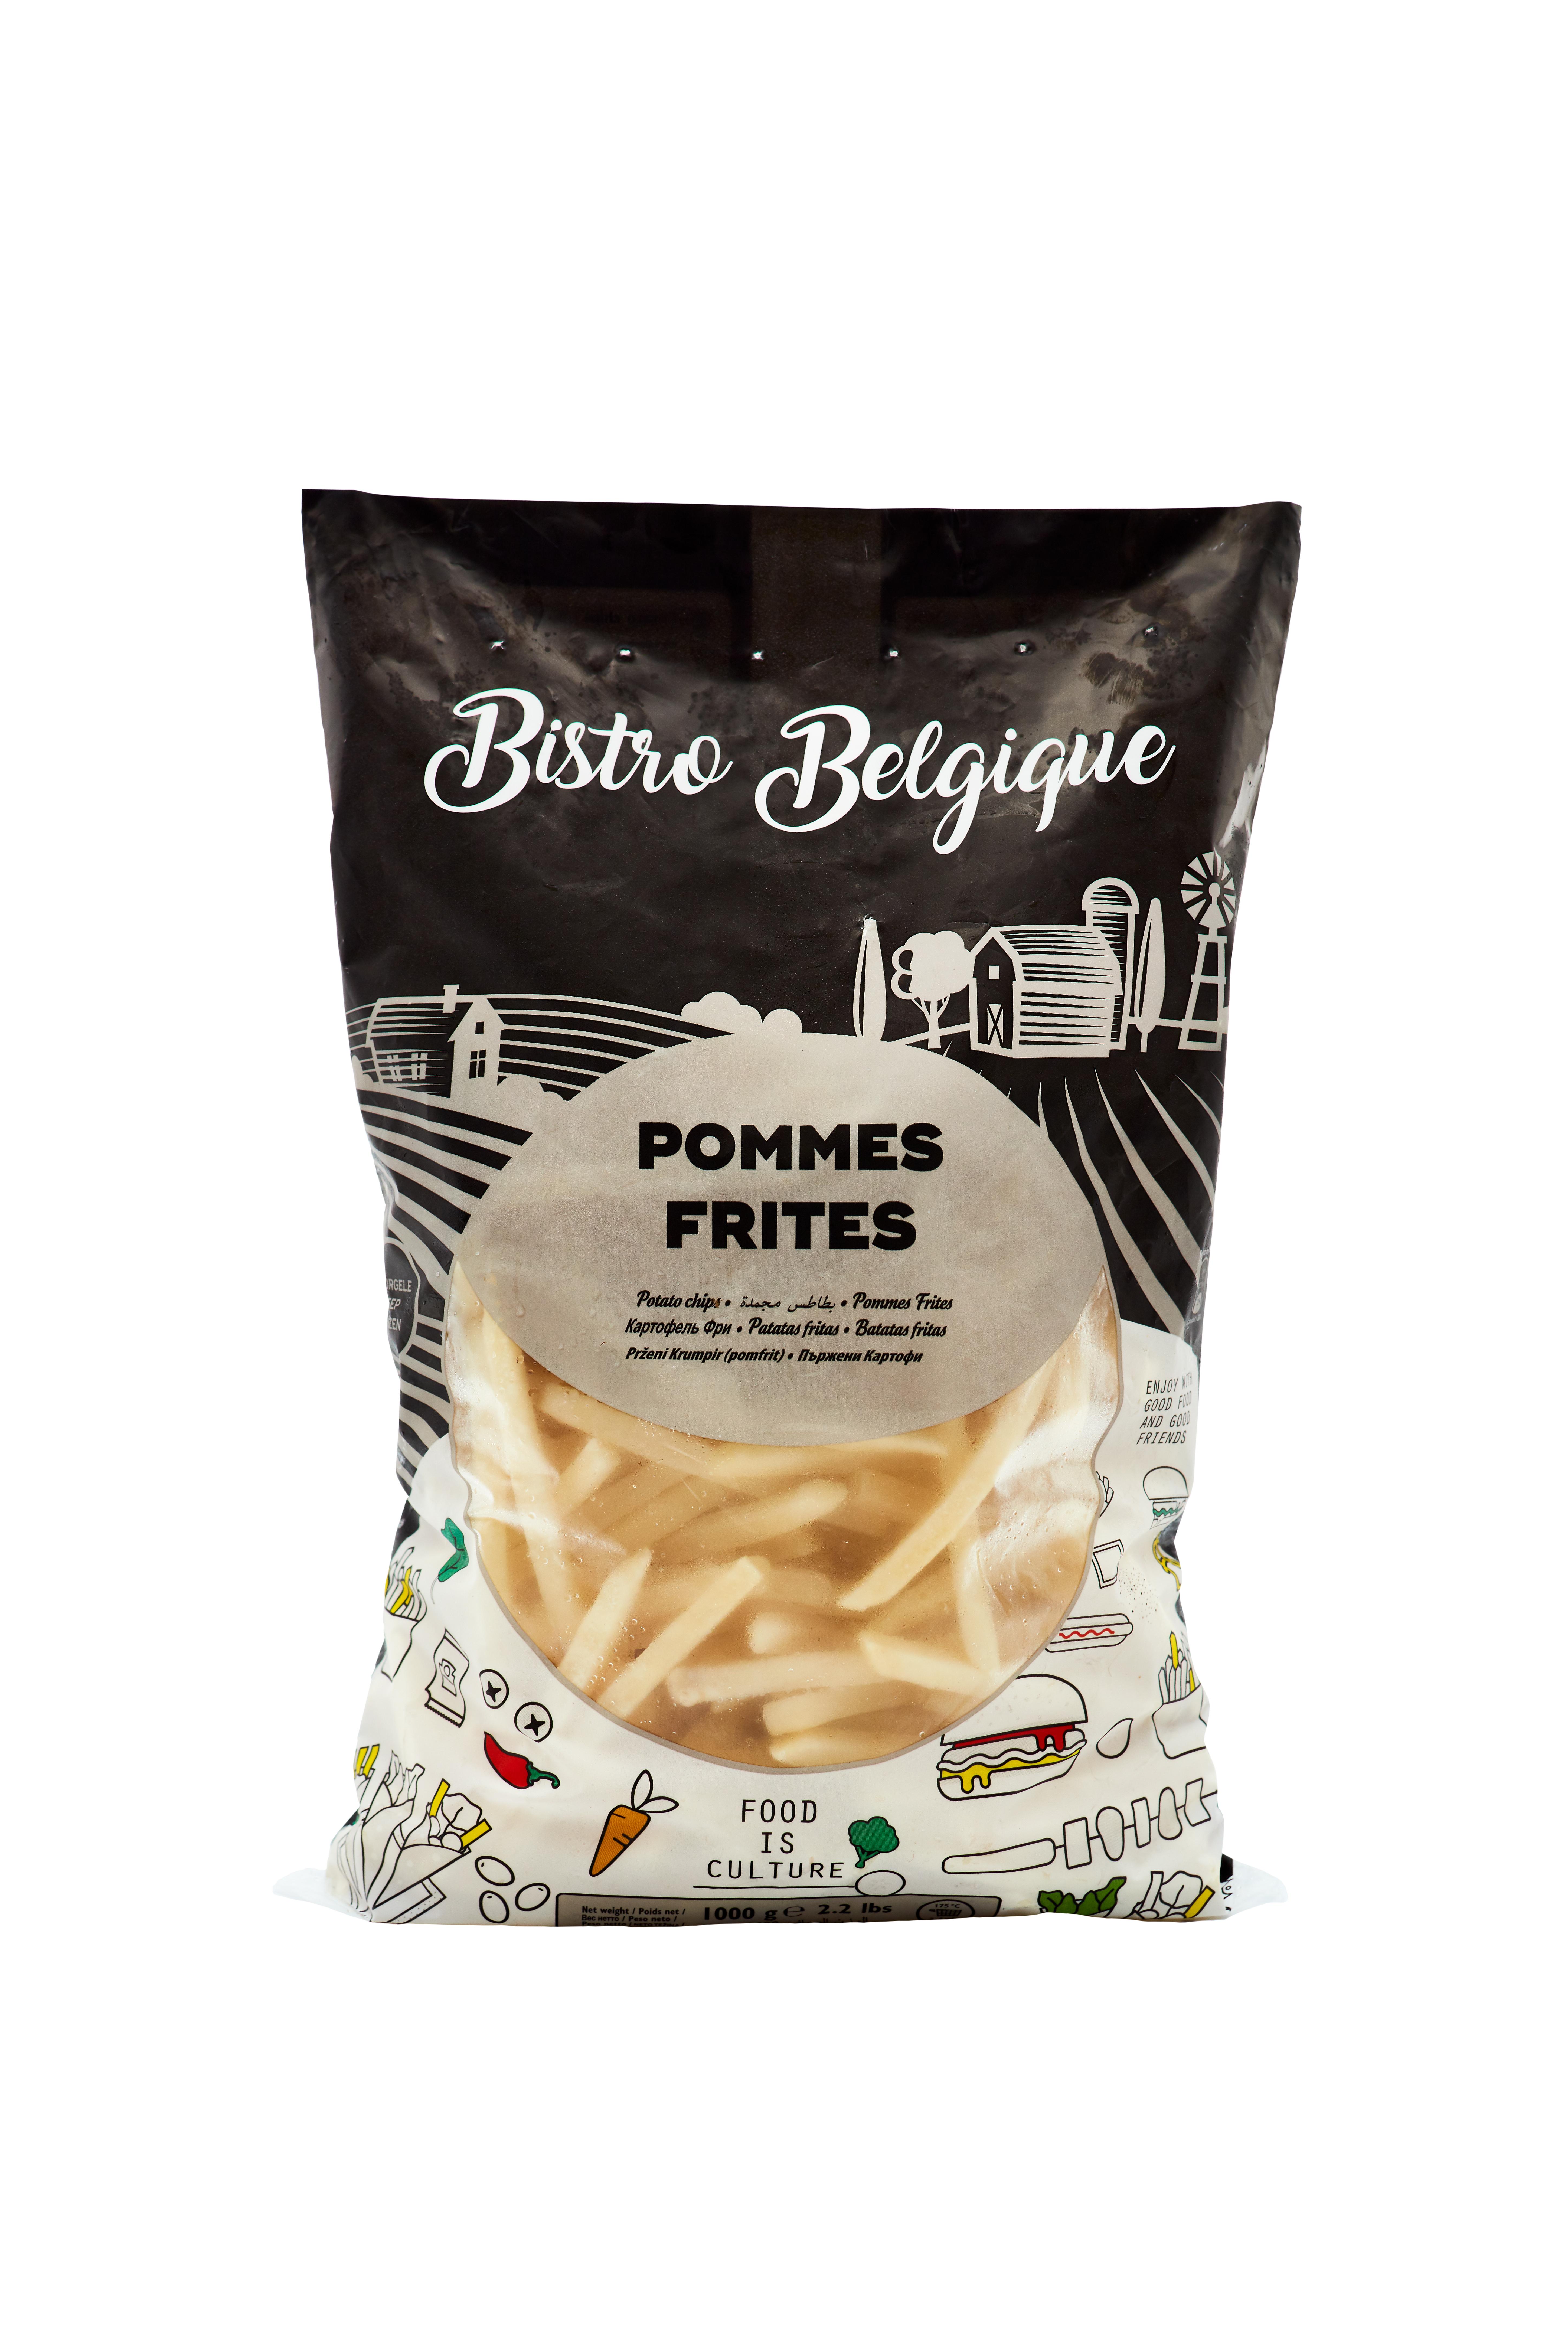 French fries 7x7mm packaging Bistro Belgique brand